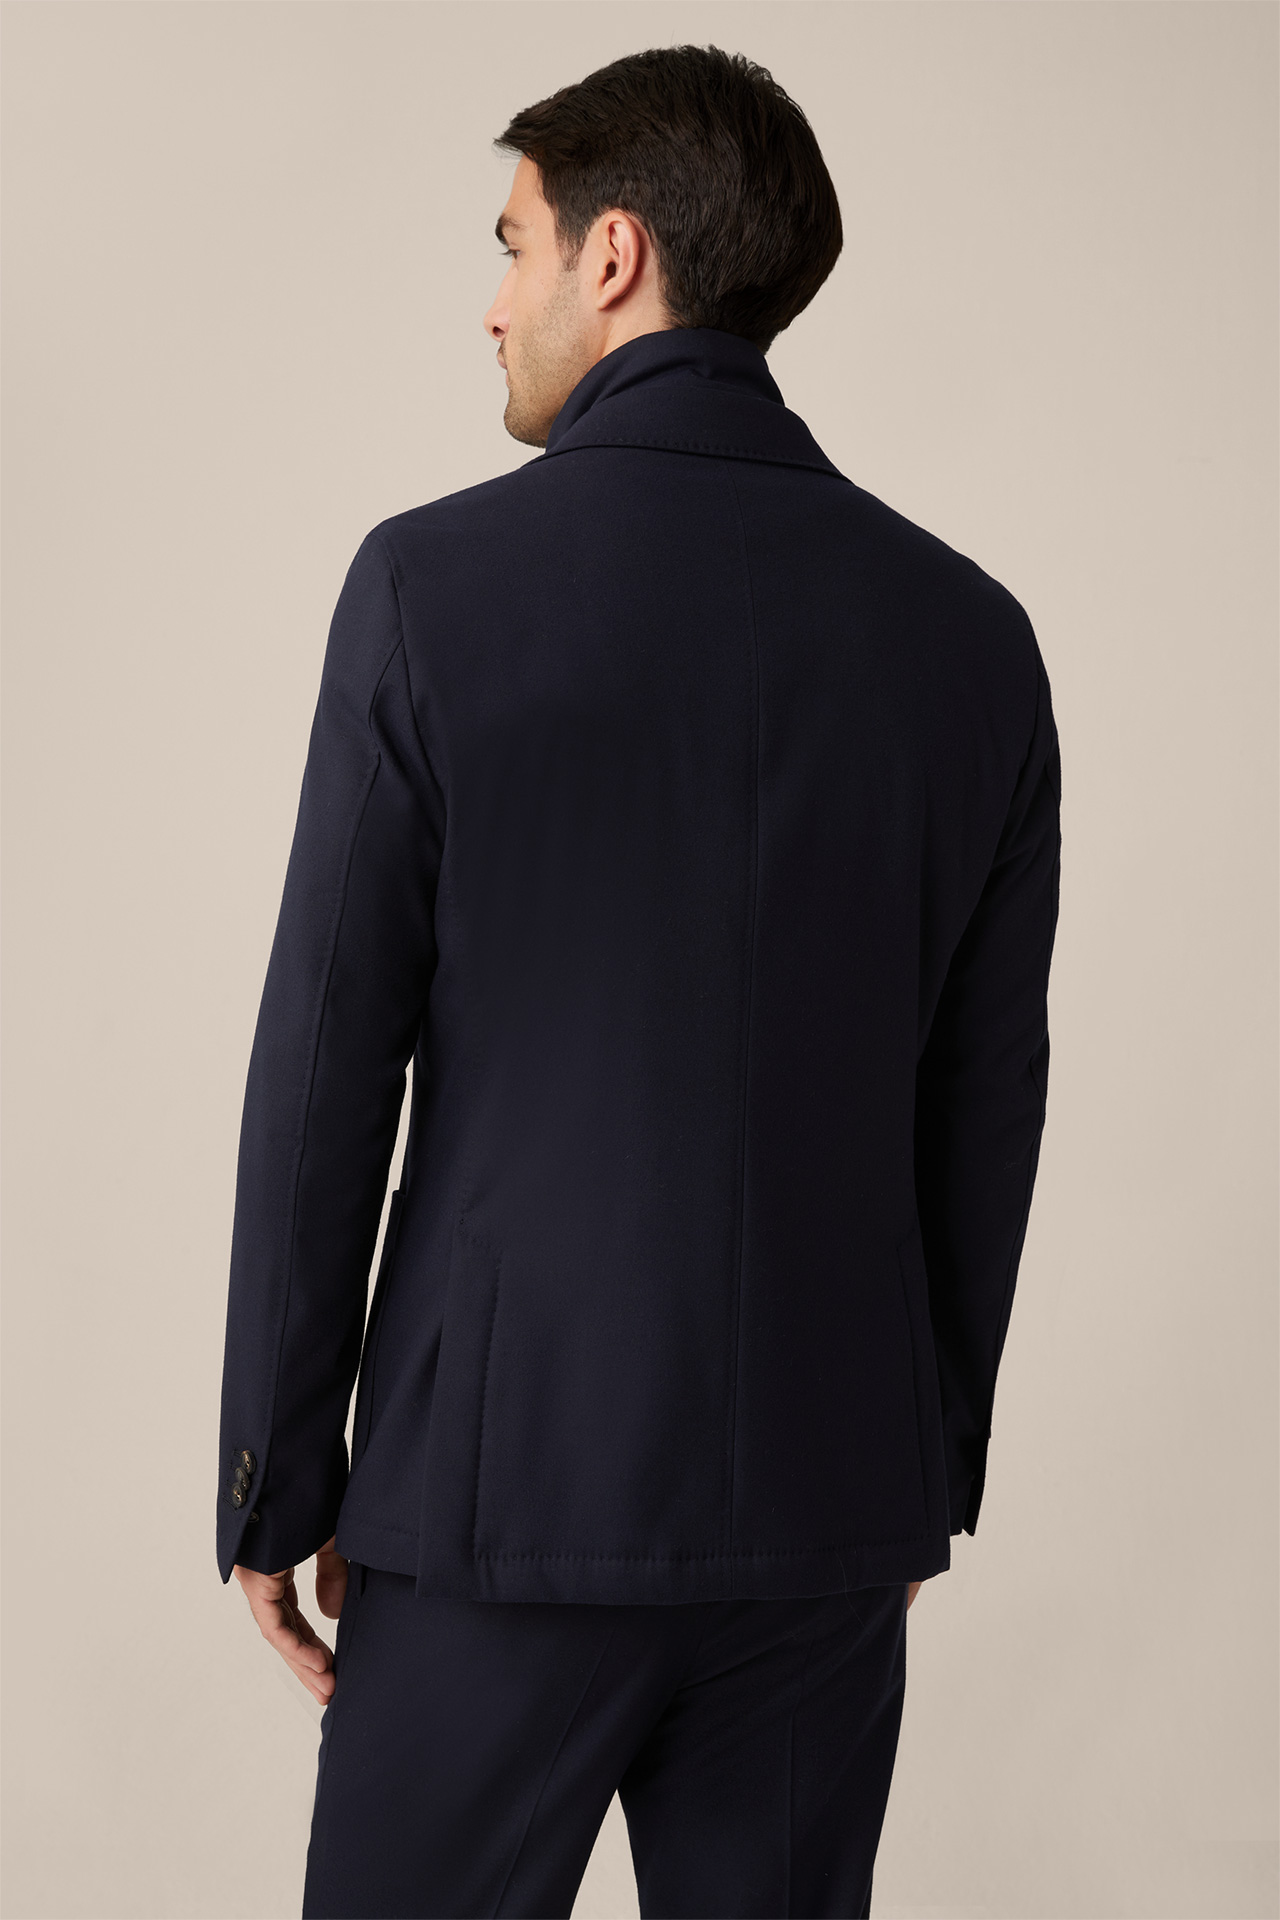 Tristo Wool Flannel Modular Jacket with Inlay in Navy 